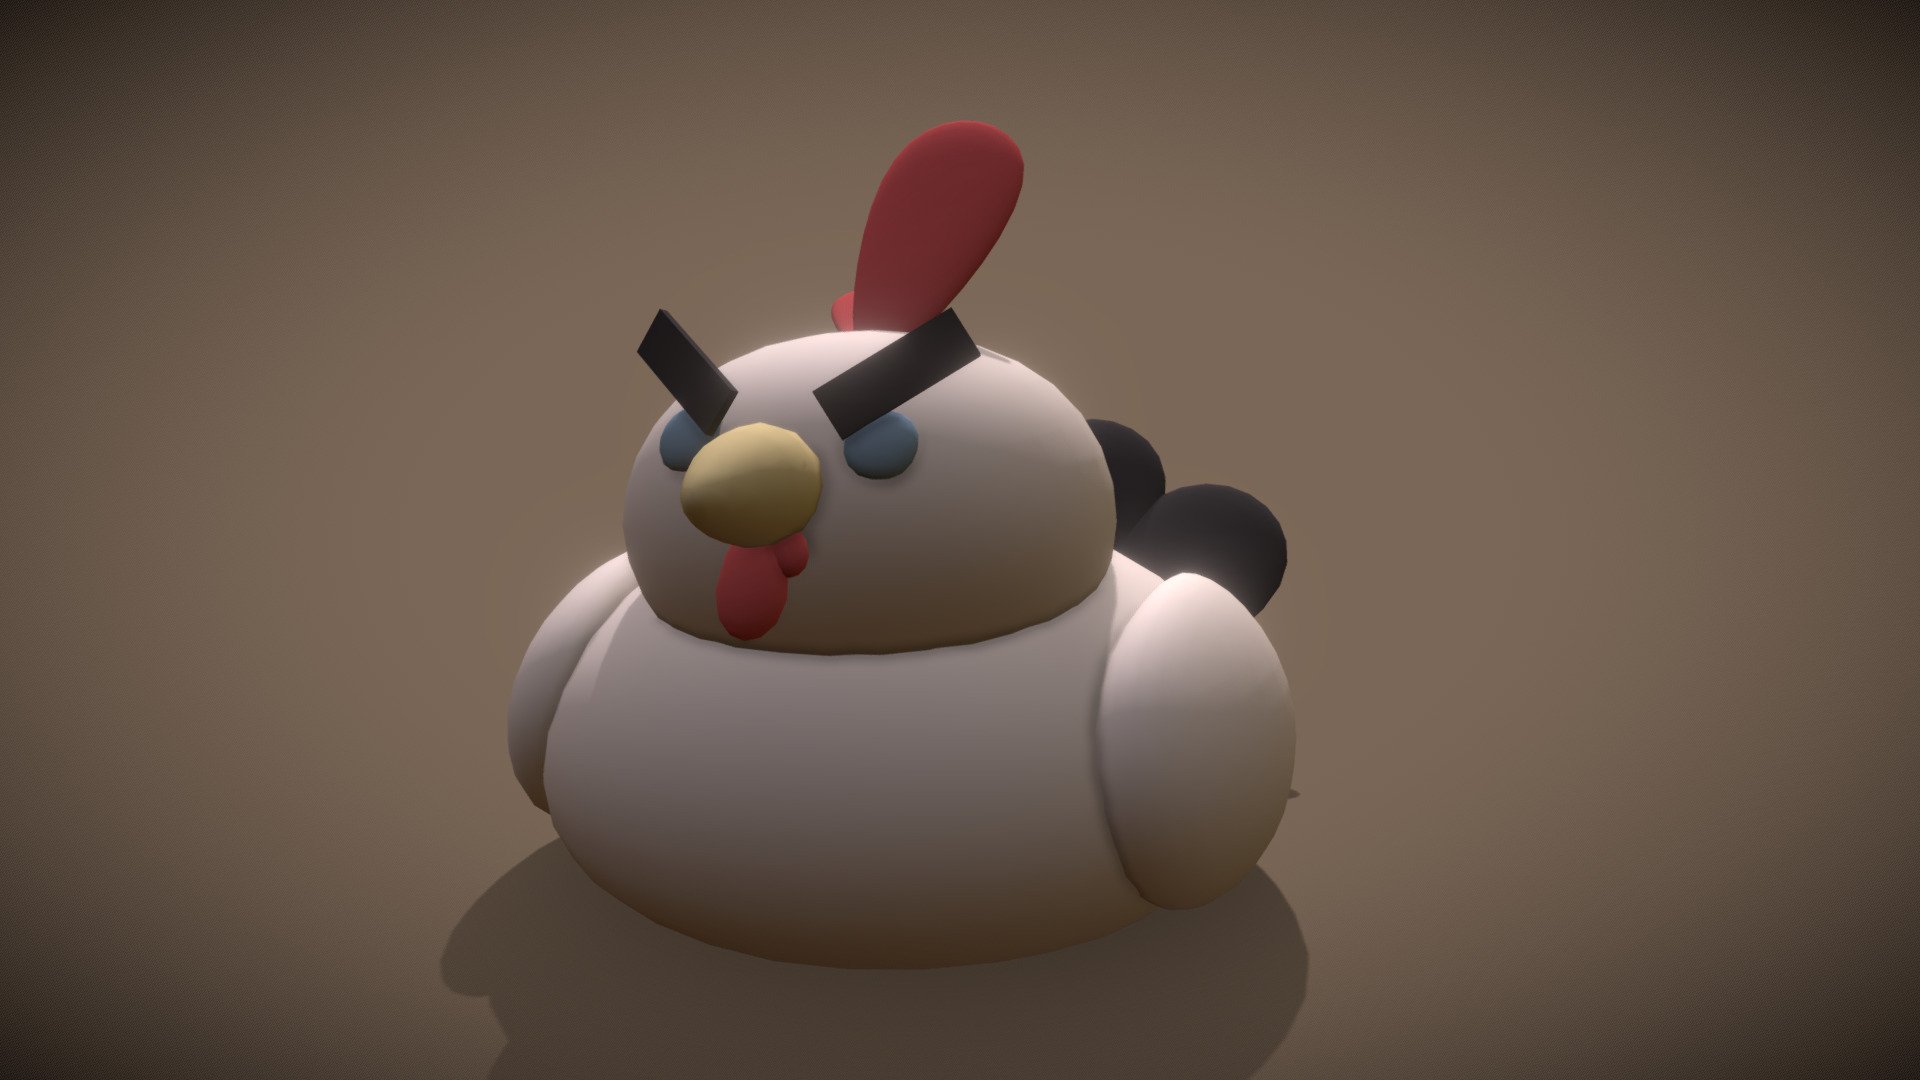 She doesn't like you watching her sit on her egg - Chicken - 3D model by Bloo_the_Fluff 3d model